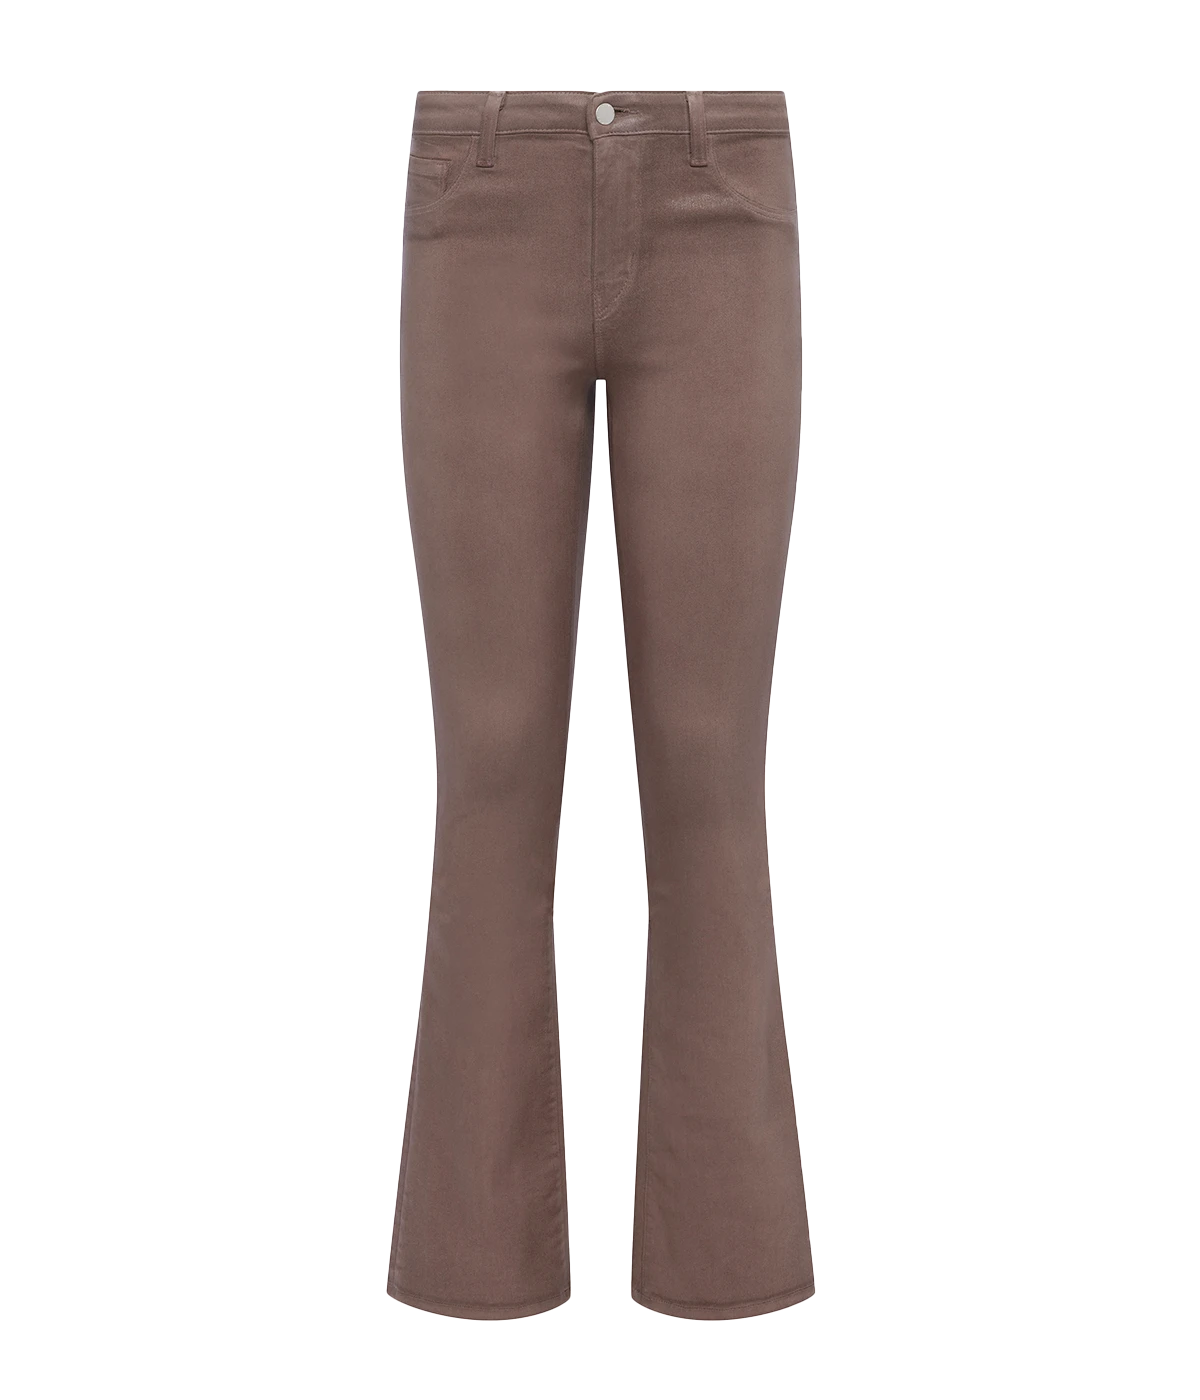 Selma High Rise Sleek Baby Boot Pant in Deep Taupe Coated